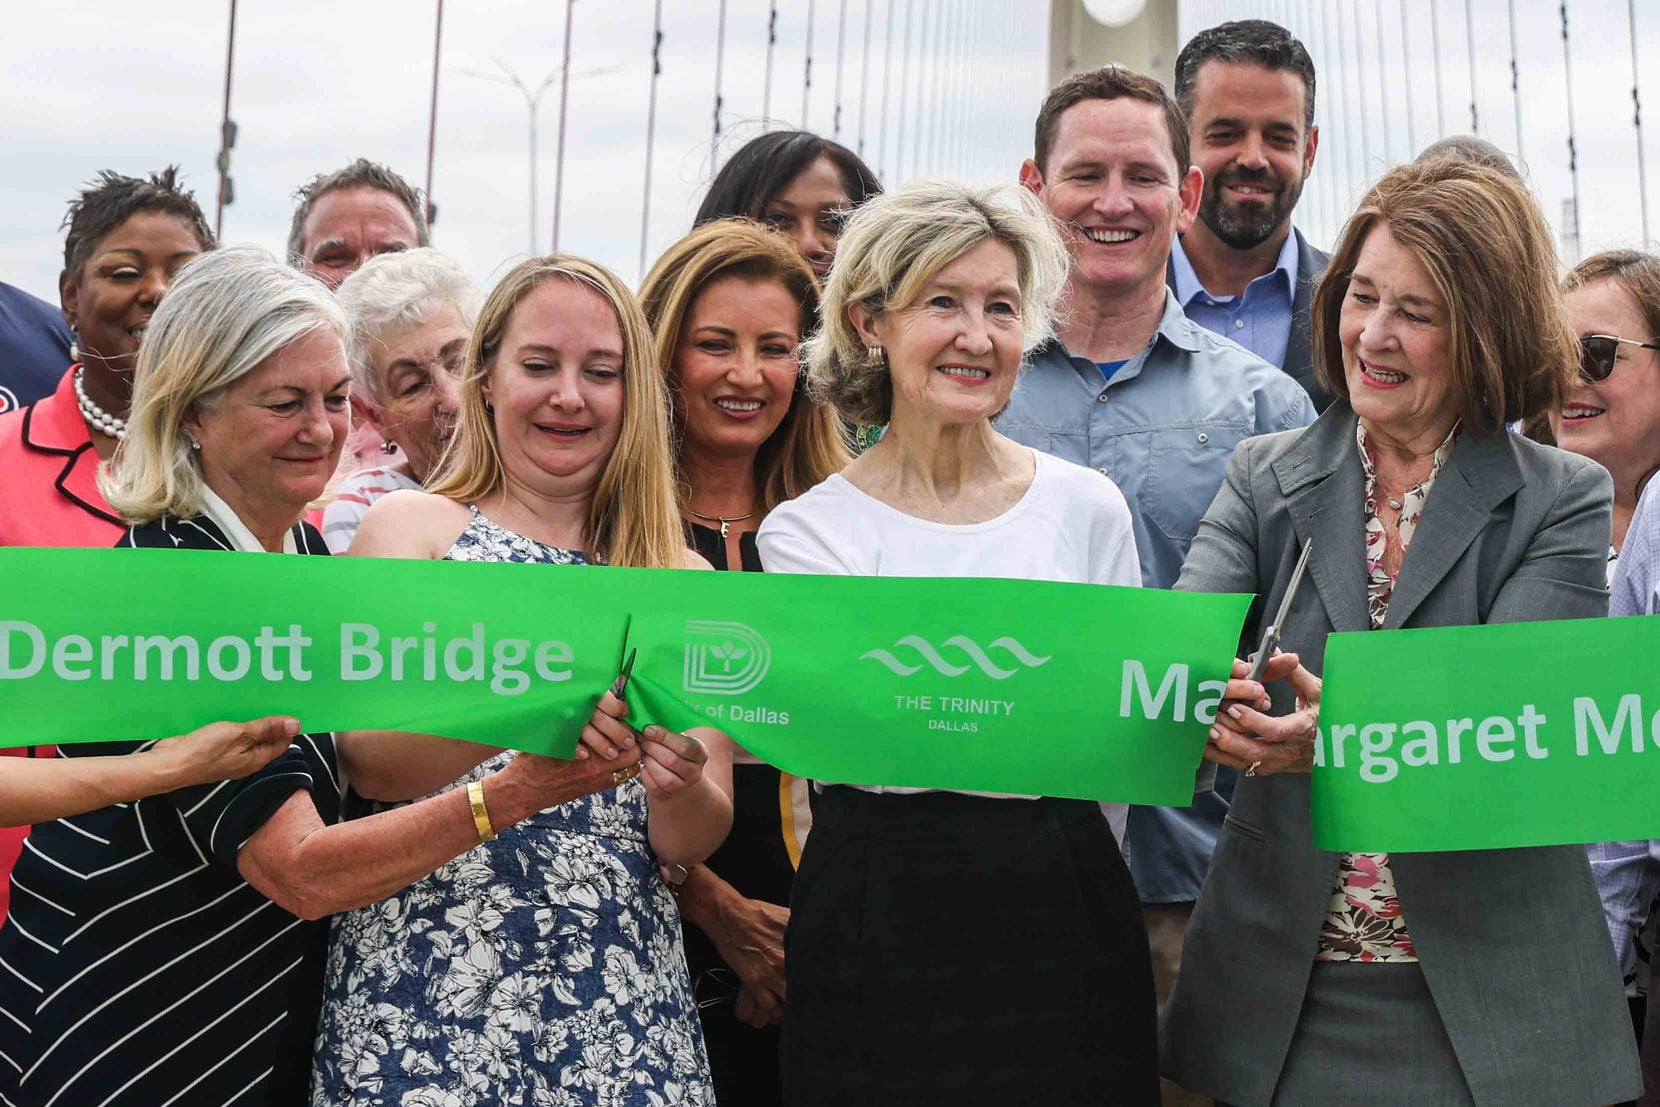 A ribbon cutting on Thursday celebrated the opening of the eastbound and westbound pedestrian and bicycle lanes of the Margaret McDermott Bridge in Dallas.